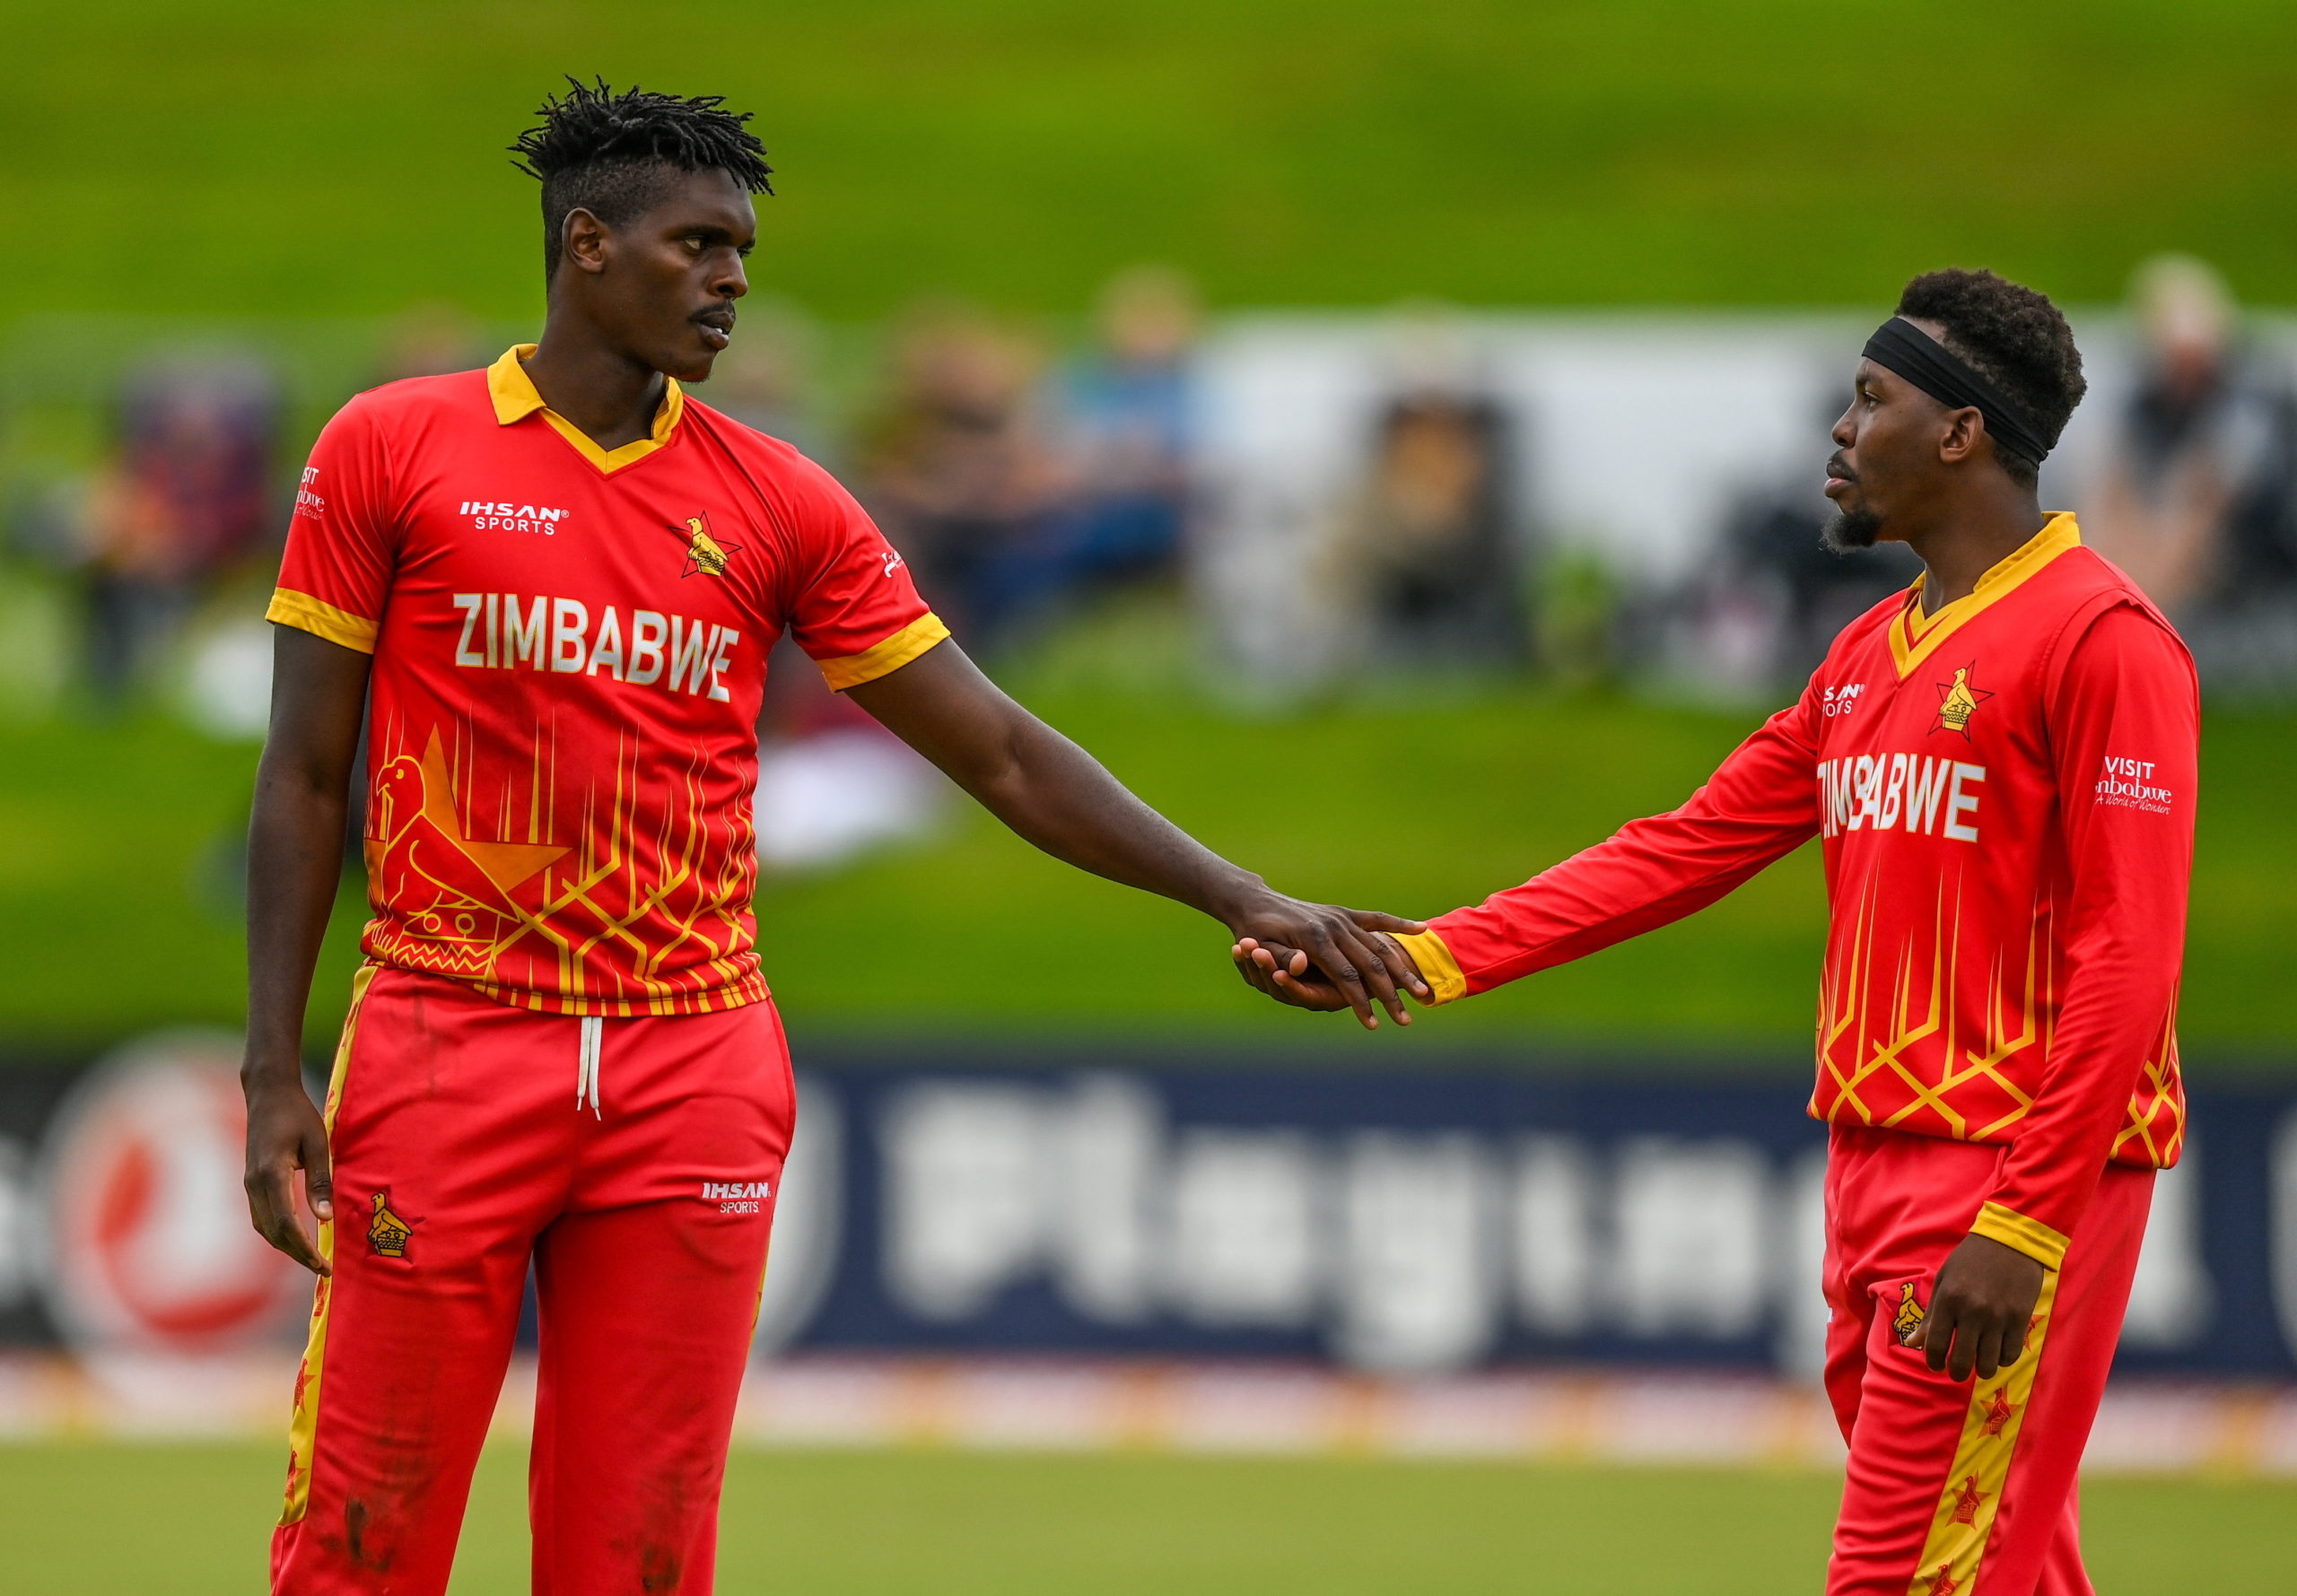 Zimbabwe go down as Ireland secure T20I series victory